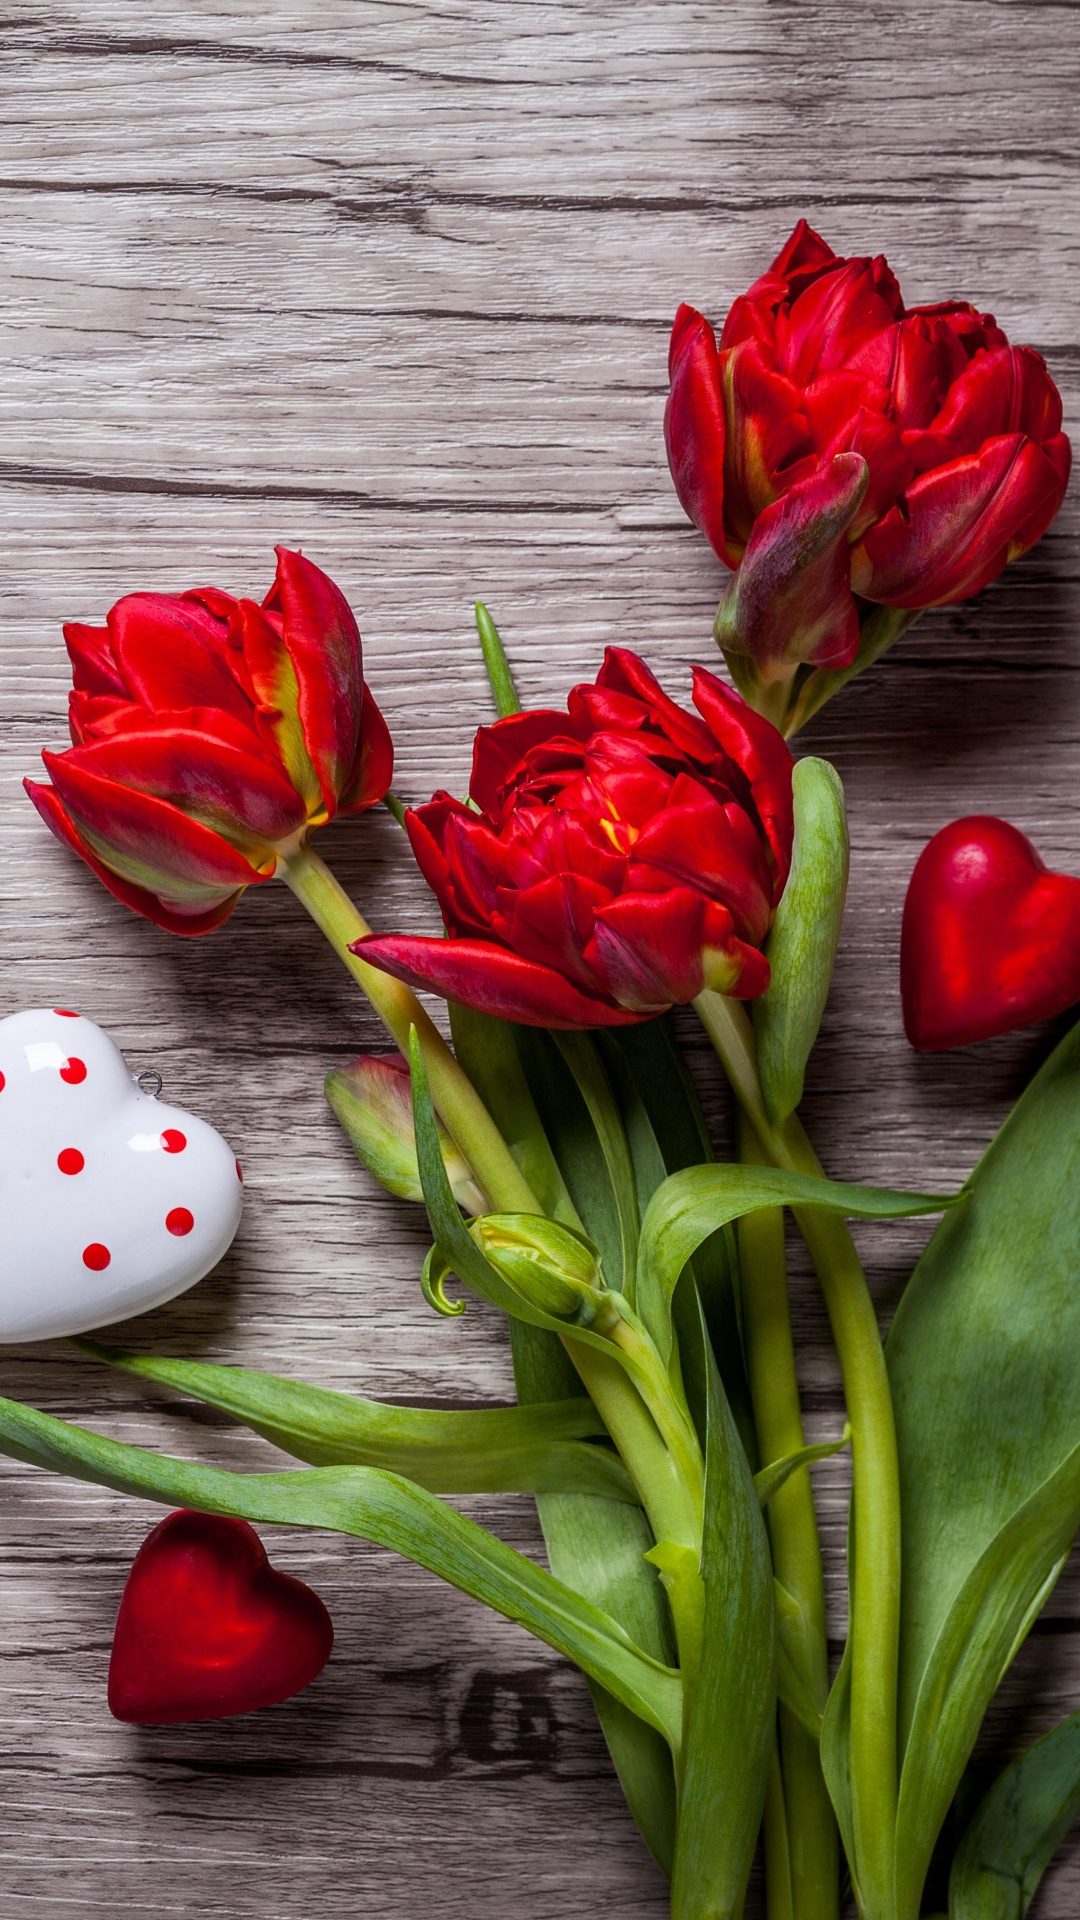 Red Tulips on Gray Wooden Surface. Wallpaper in 1080x1920 Resolution